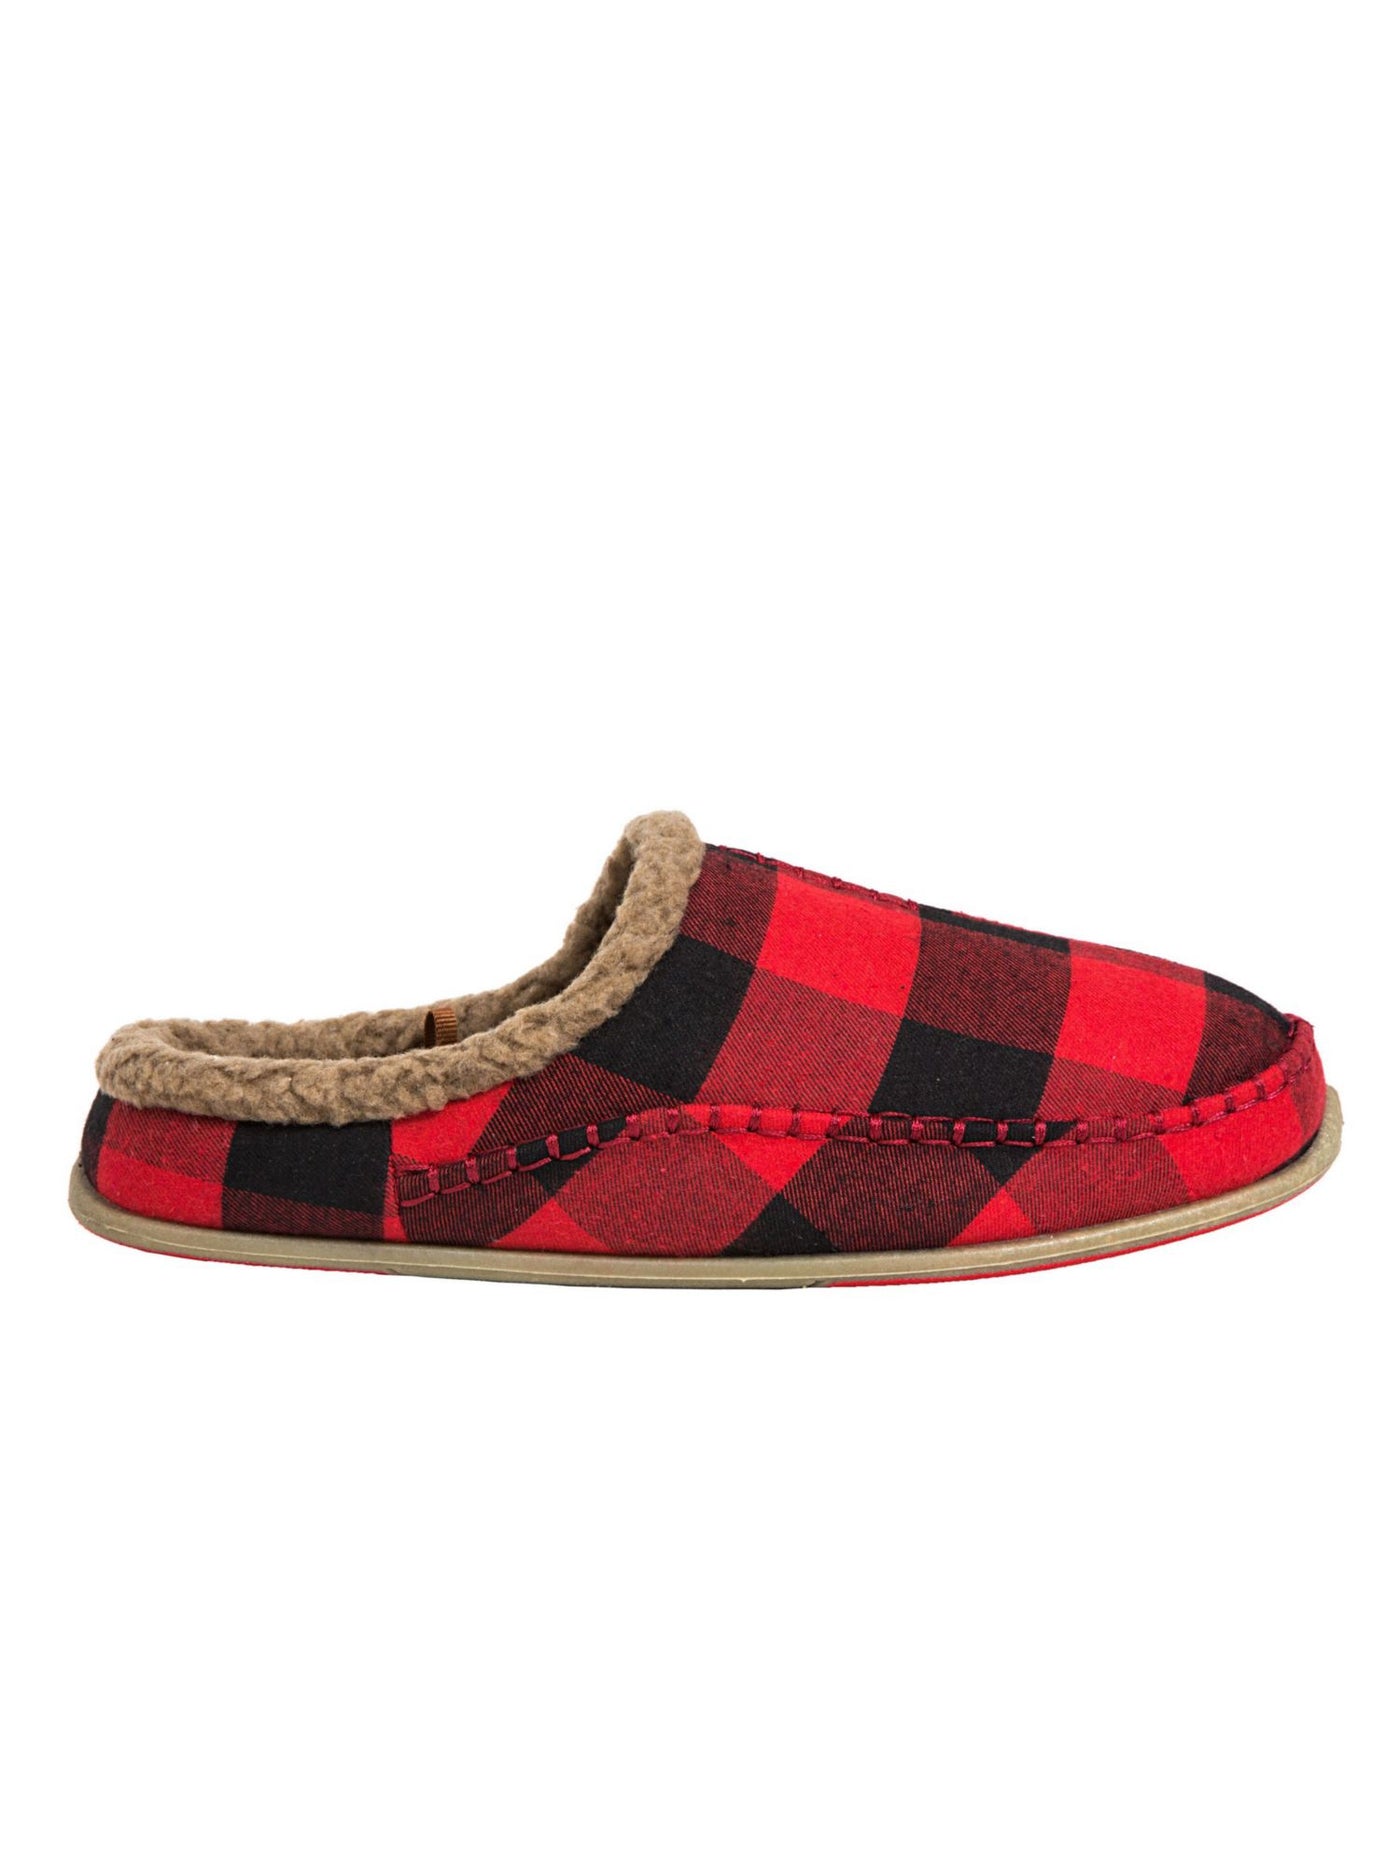 DEER STAGS SLIPPEROOZ Mens Red Plaid Comfort Nordic Round Toe Platform Slip On Slippers Shoes 7 M